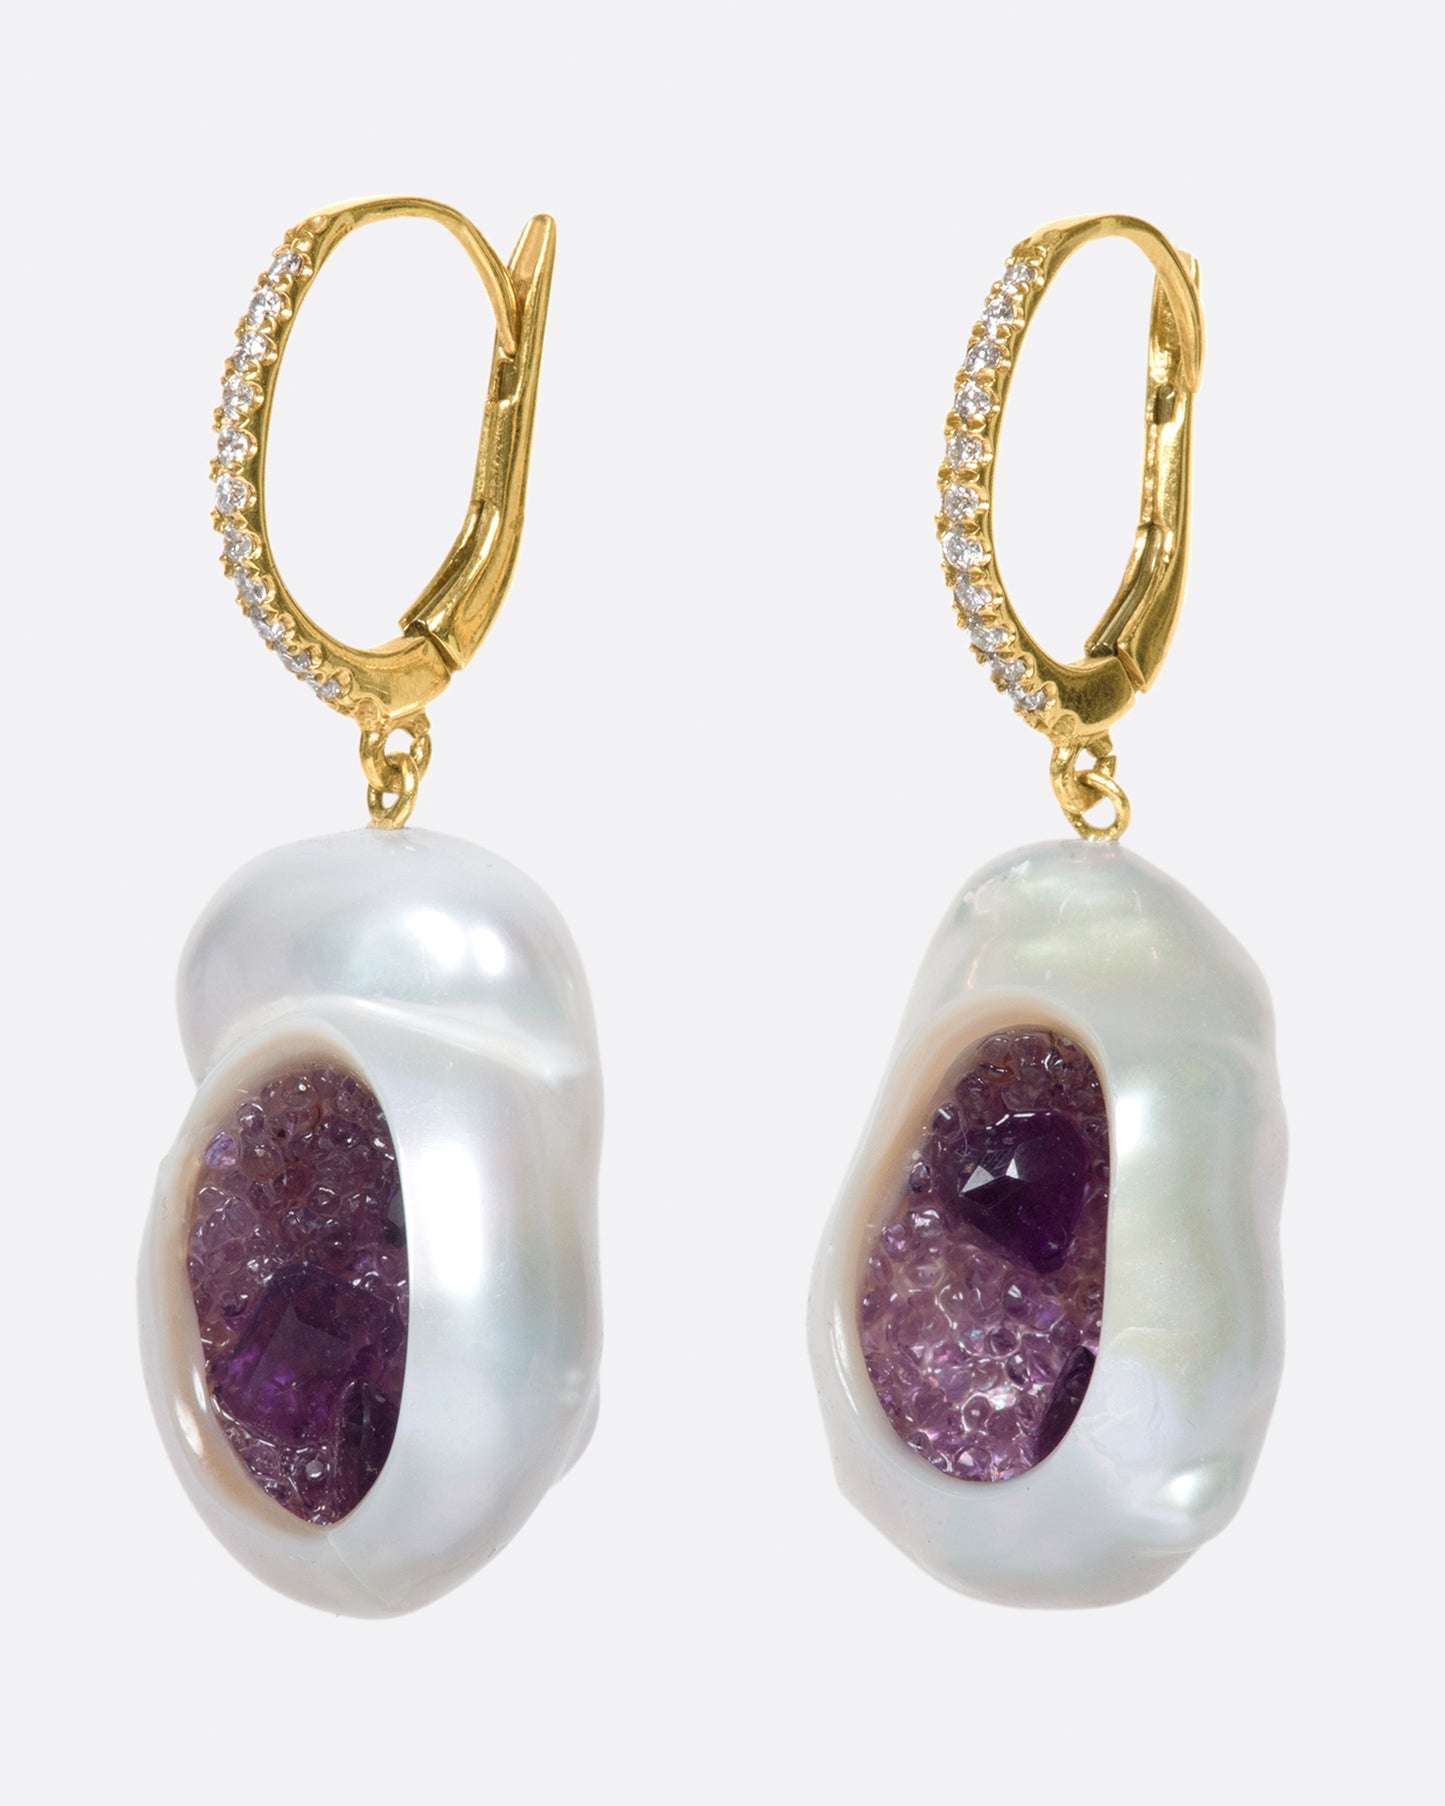 two dangle drop earrings hanging and viewed from the side. the drop is a pearl that has been partially carved out and lined with amethysts. the yellow gold hooks have pave diamonds on the bail.